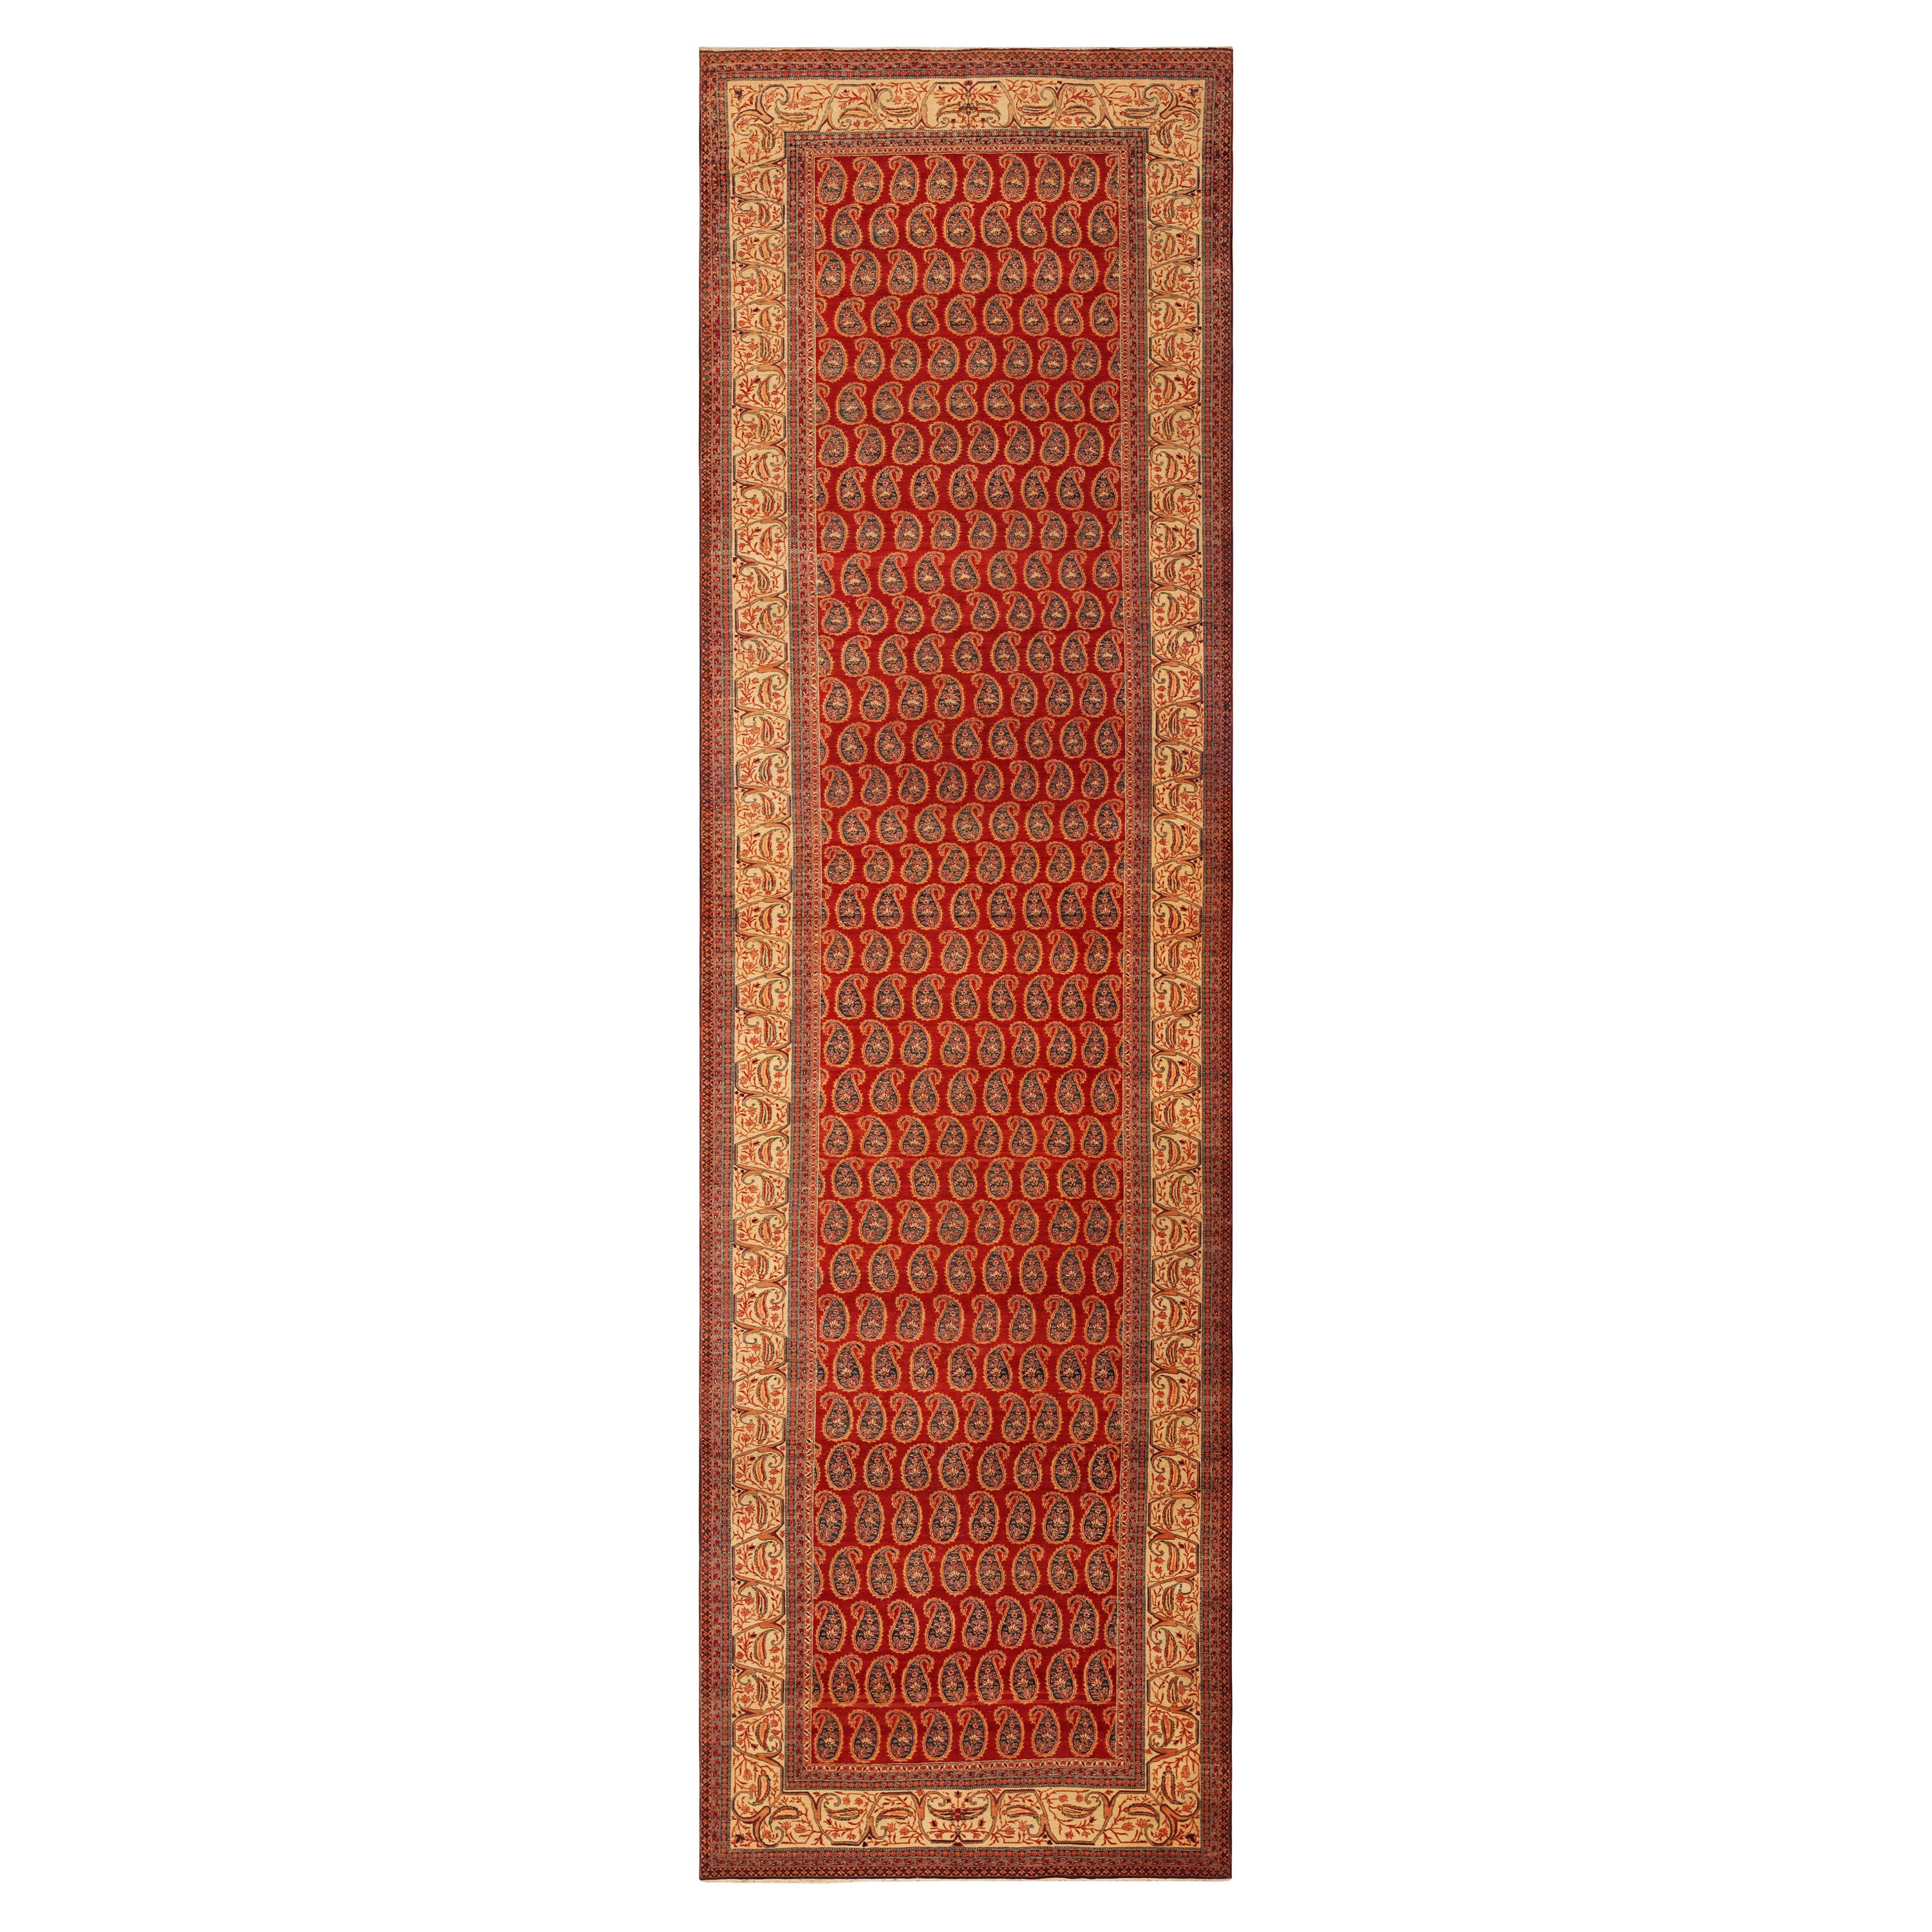 Antique Persian Tabriz Runner Rug. Size: 5 ft 10 in x 20 ft 2 in